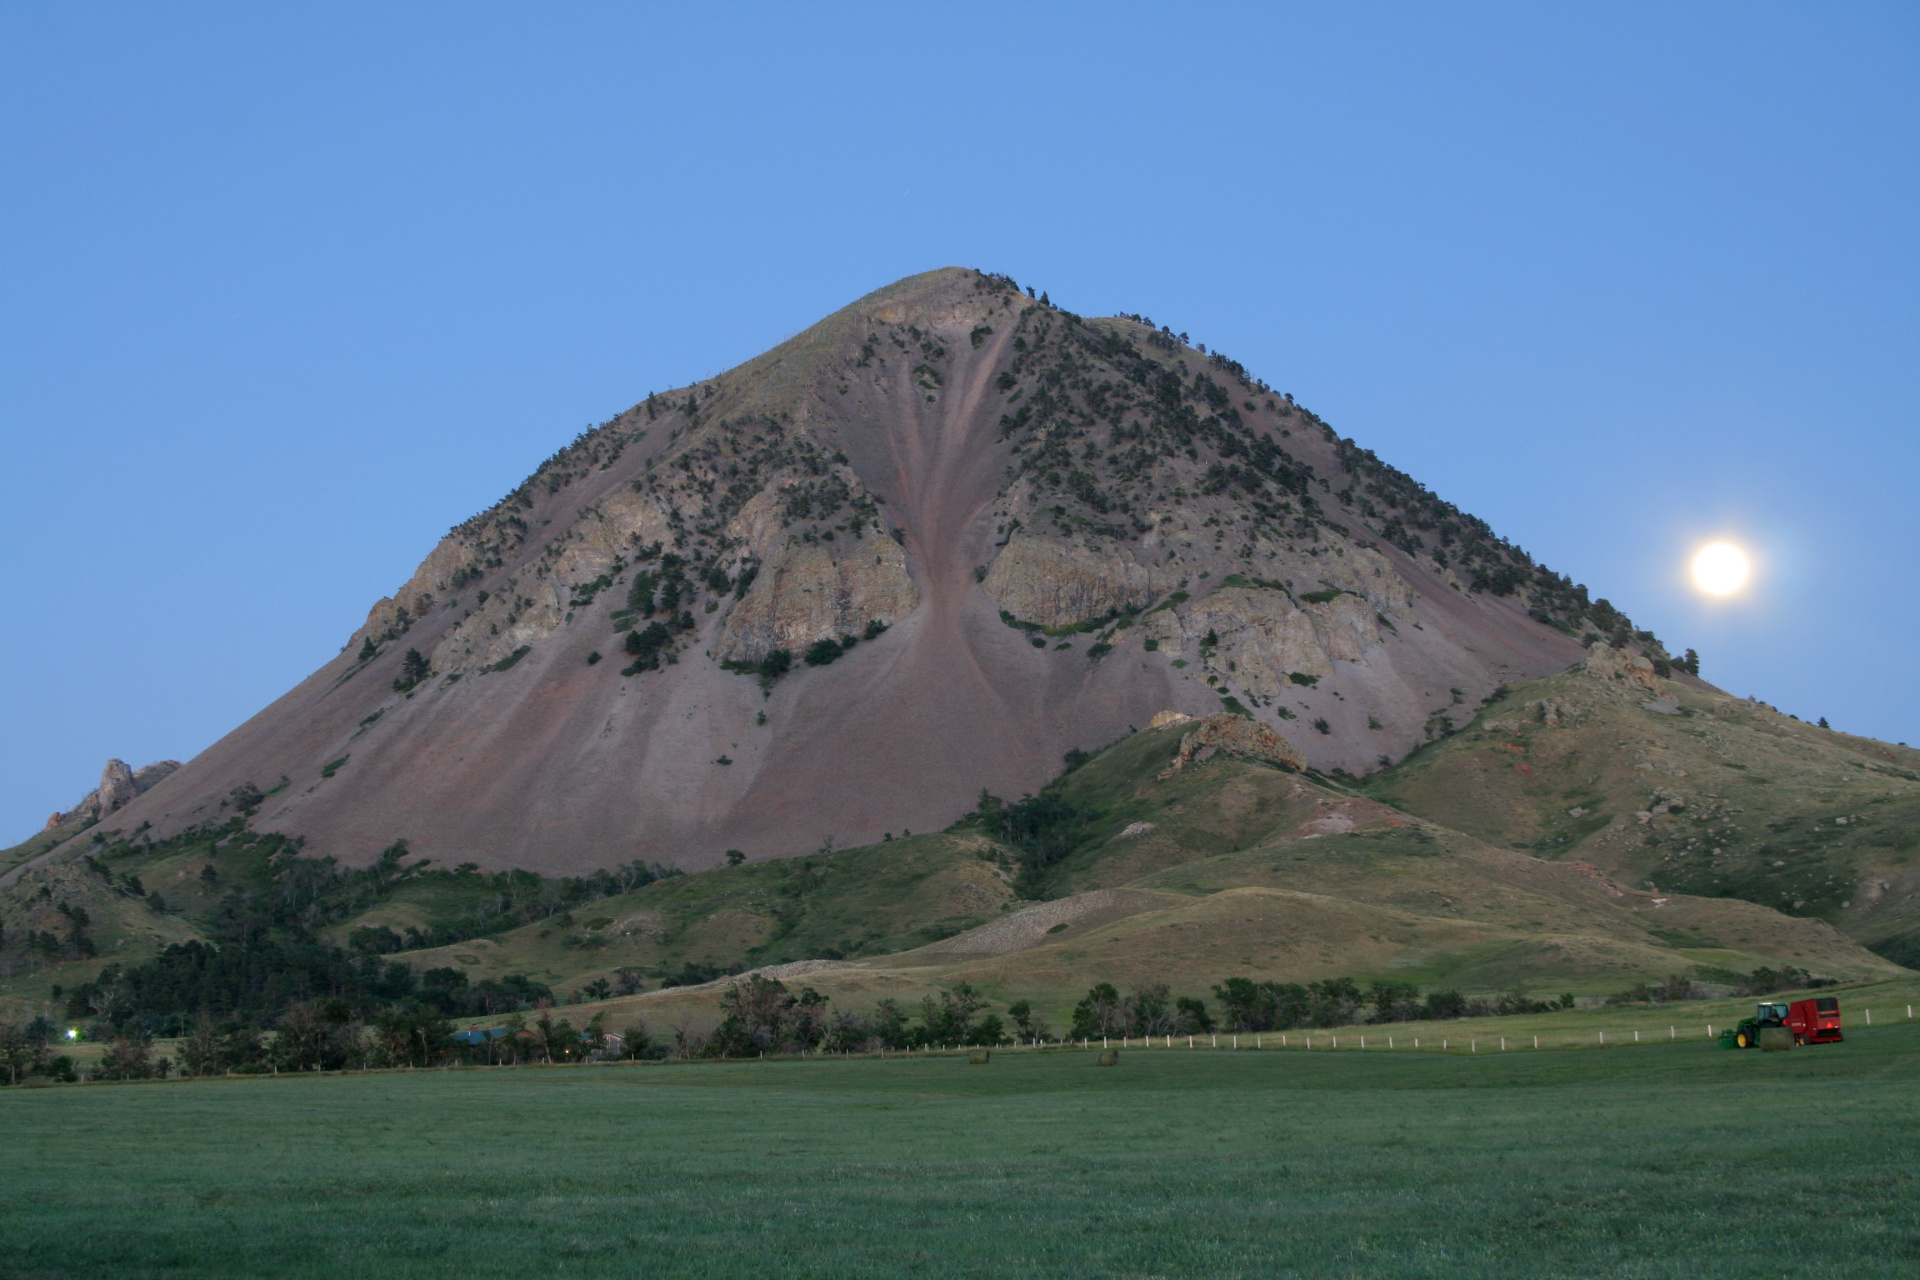 Moon (Travels » US Trip 1: Cheyenne Country » The Journey » Bear Butte)